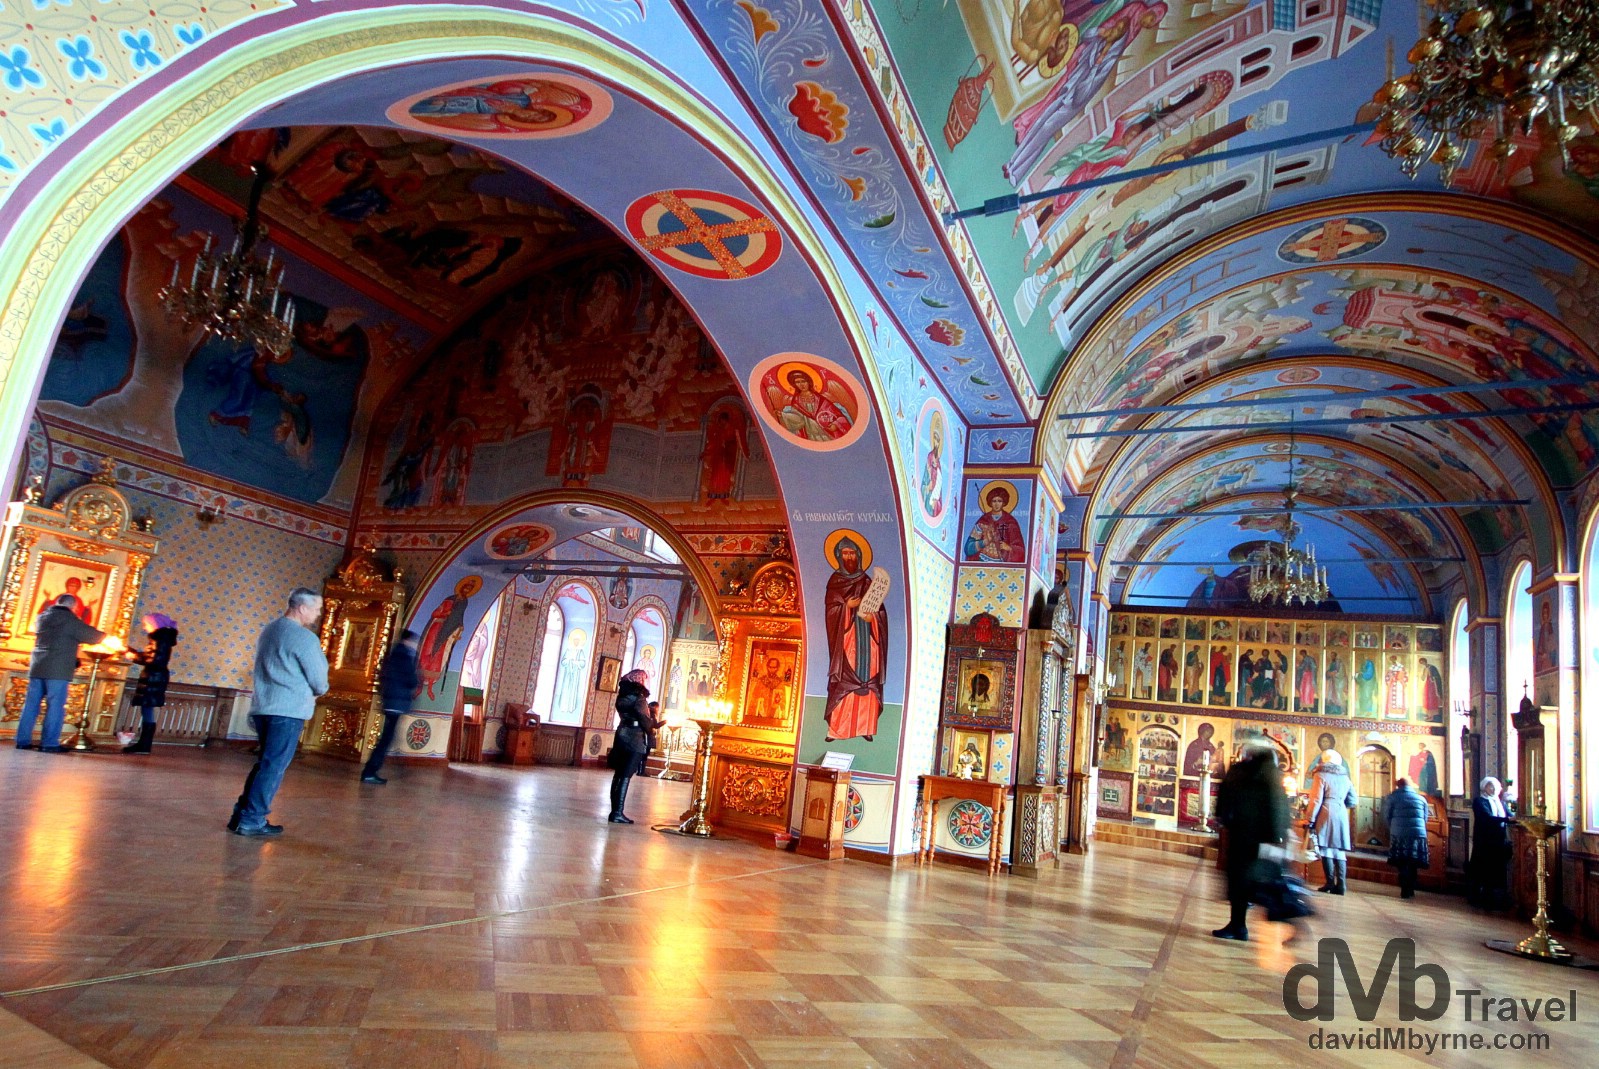 The interior of the Epiphany Cathedral in Tomsk, Siberian Russia. November 11th 2012.